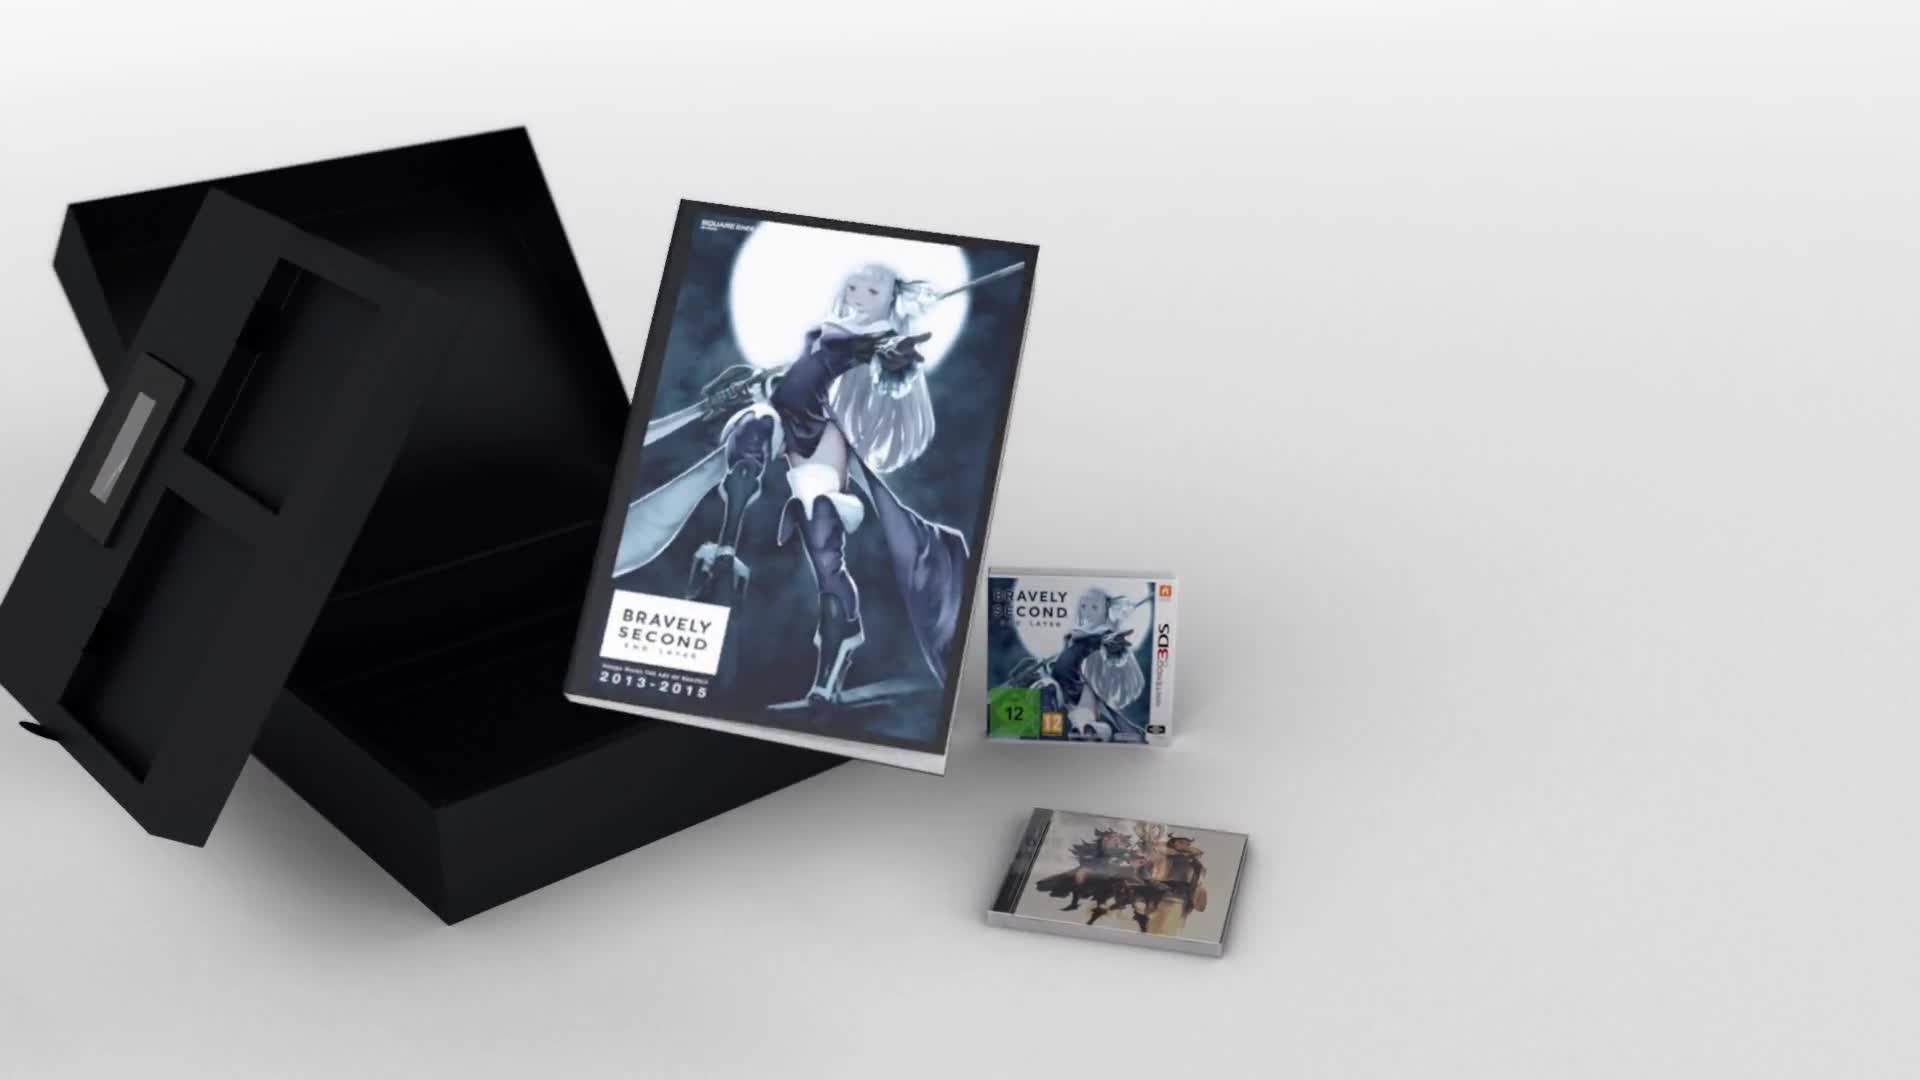 Bravely Second: End Layer - Deluxe Collector's Edition